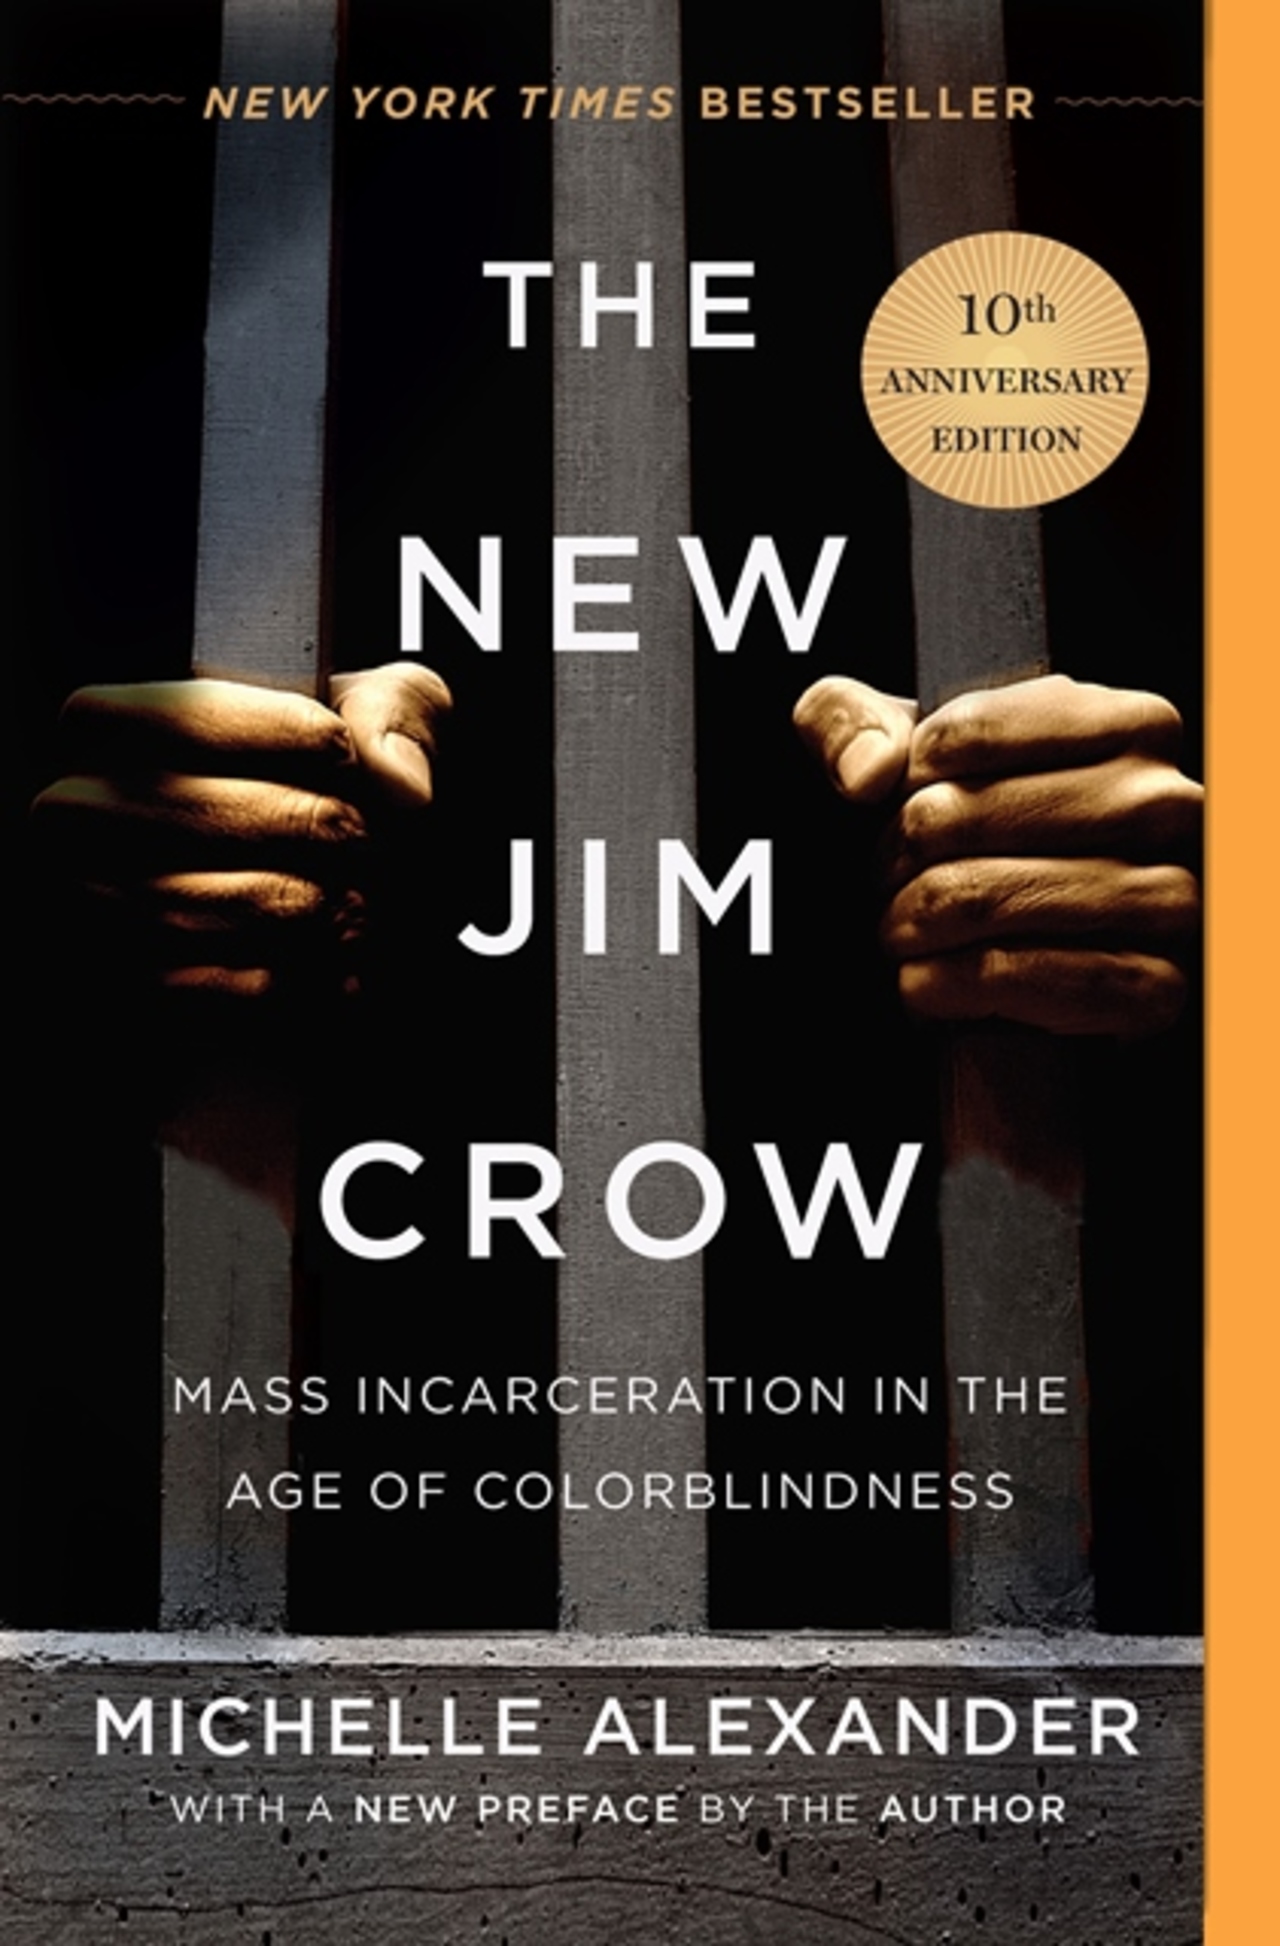 Reviewed: The New Jim Crow: Mass Incarceration in the Age of Colorblindness, by Michelle Alexander